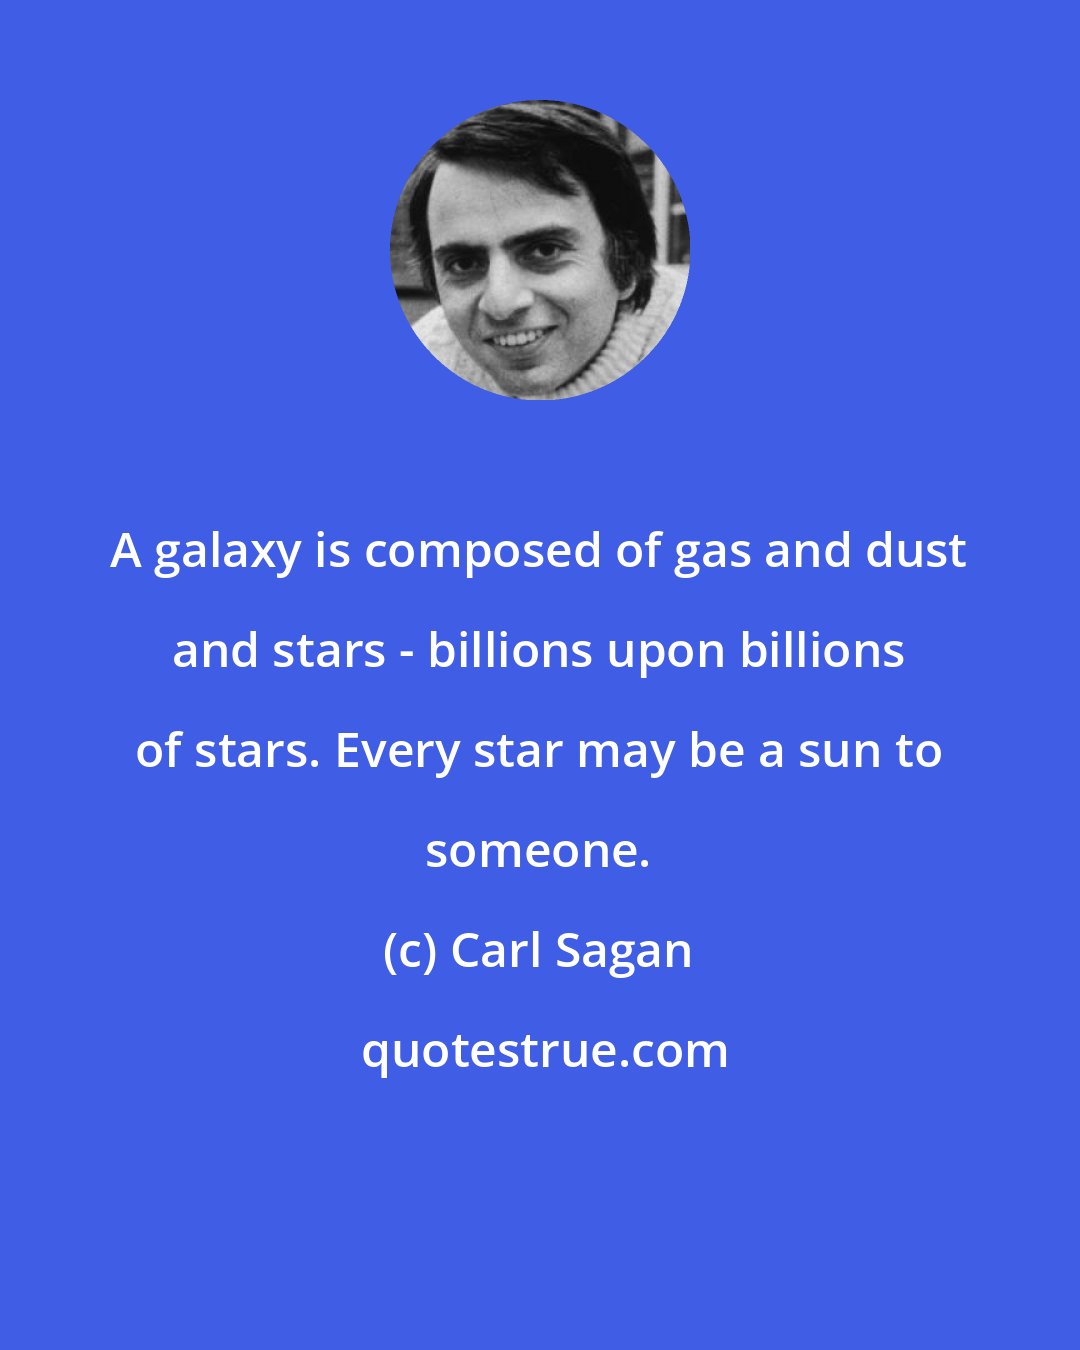 Carl Sagan: A galaxy is composed of gas and dust and stars - billions upon billions of stars. Every star may be a sun to someone.